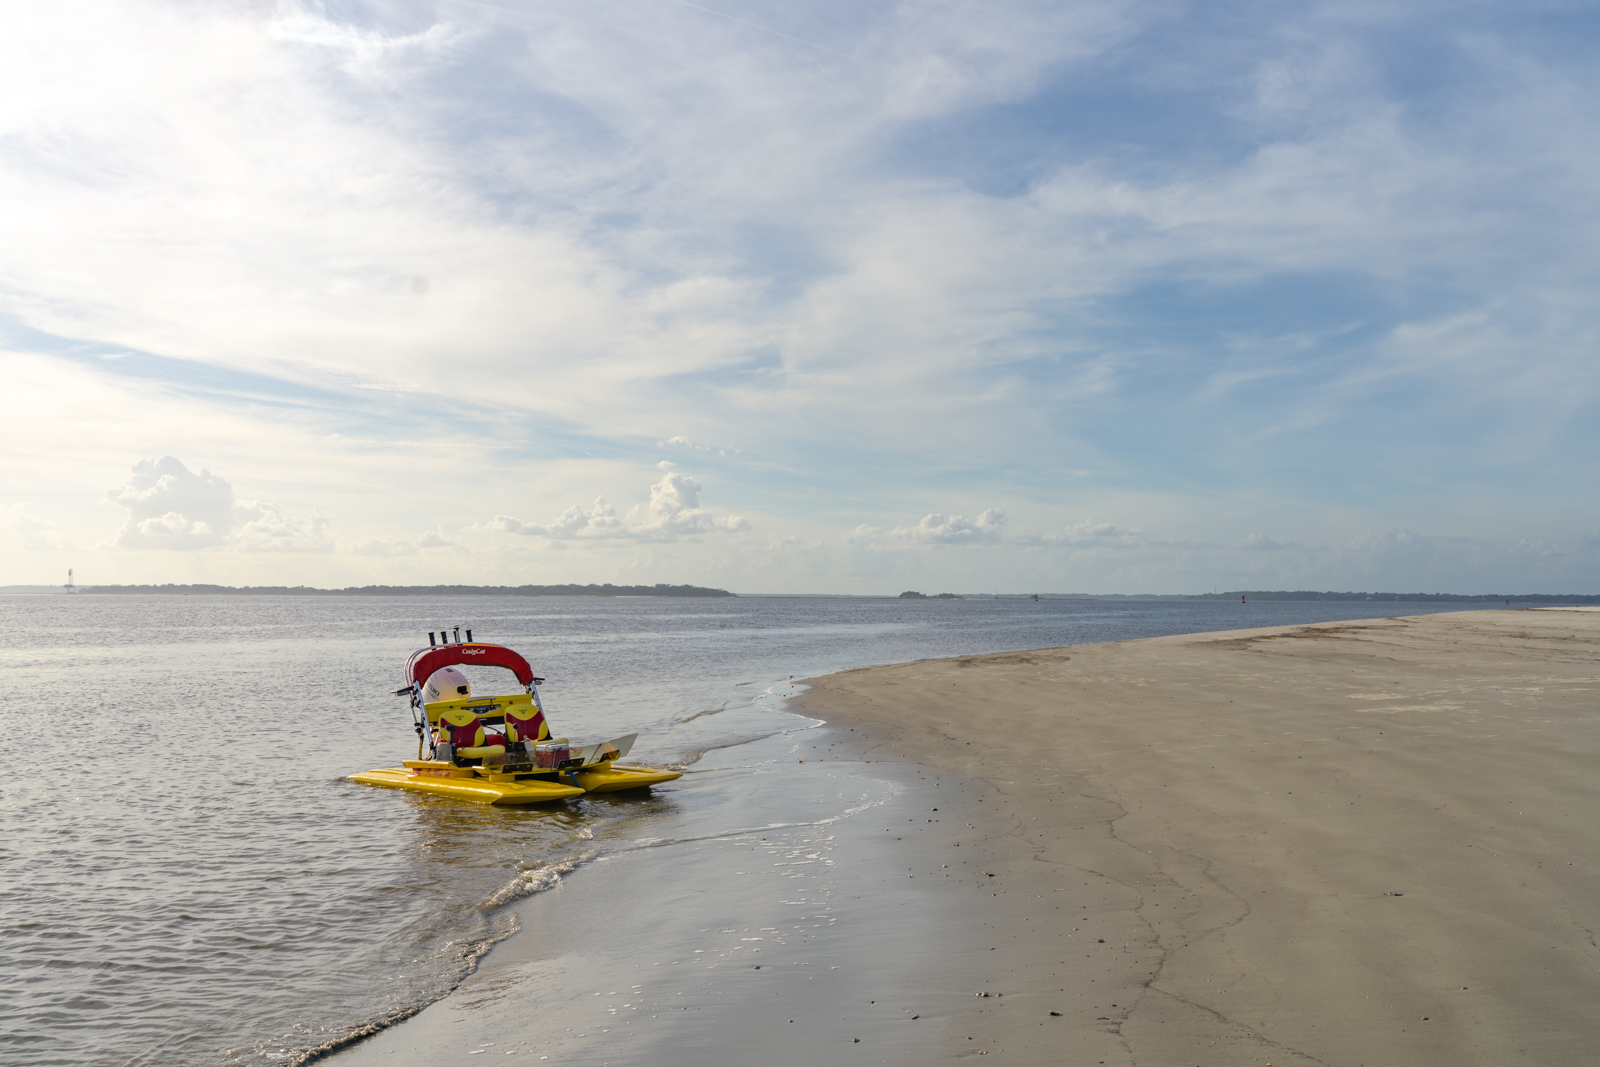 A yellow and red CraigCat with a white engine is parked on the shore of a desolate beach. A few clouds are in the background as well as a small strip of land. The sand is untouched and the scene is serene.